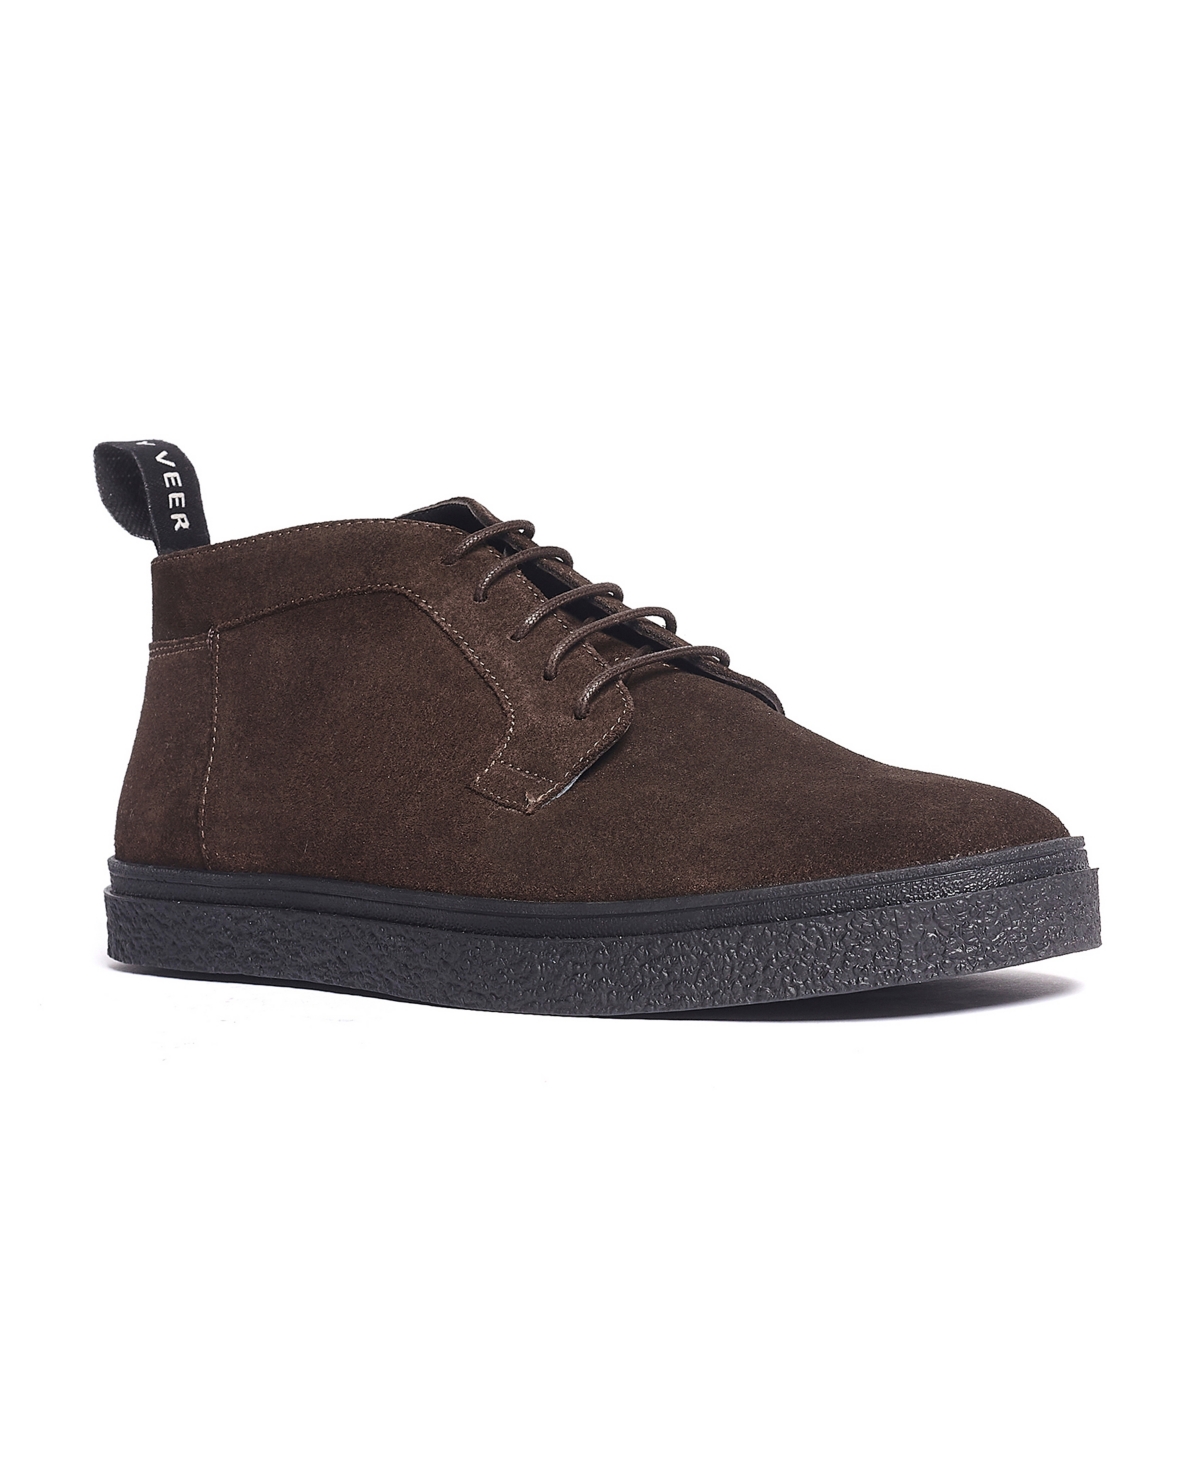 Anthony Veer Men's Bushwick Lace-up Suede Chukka Boots In Dark Brown